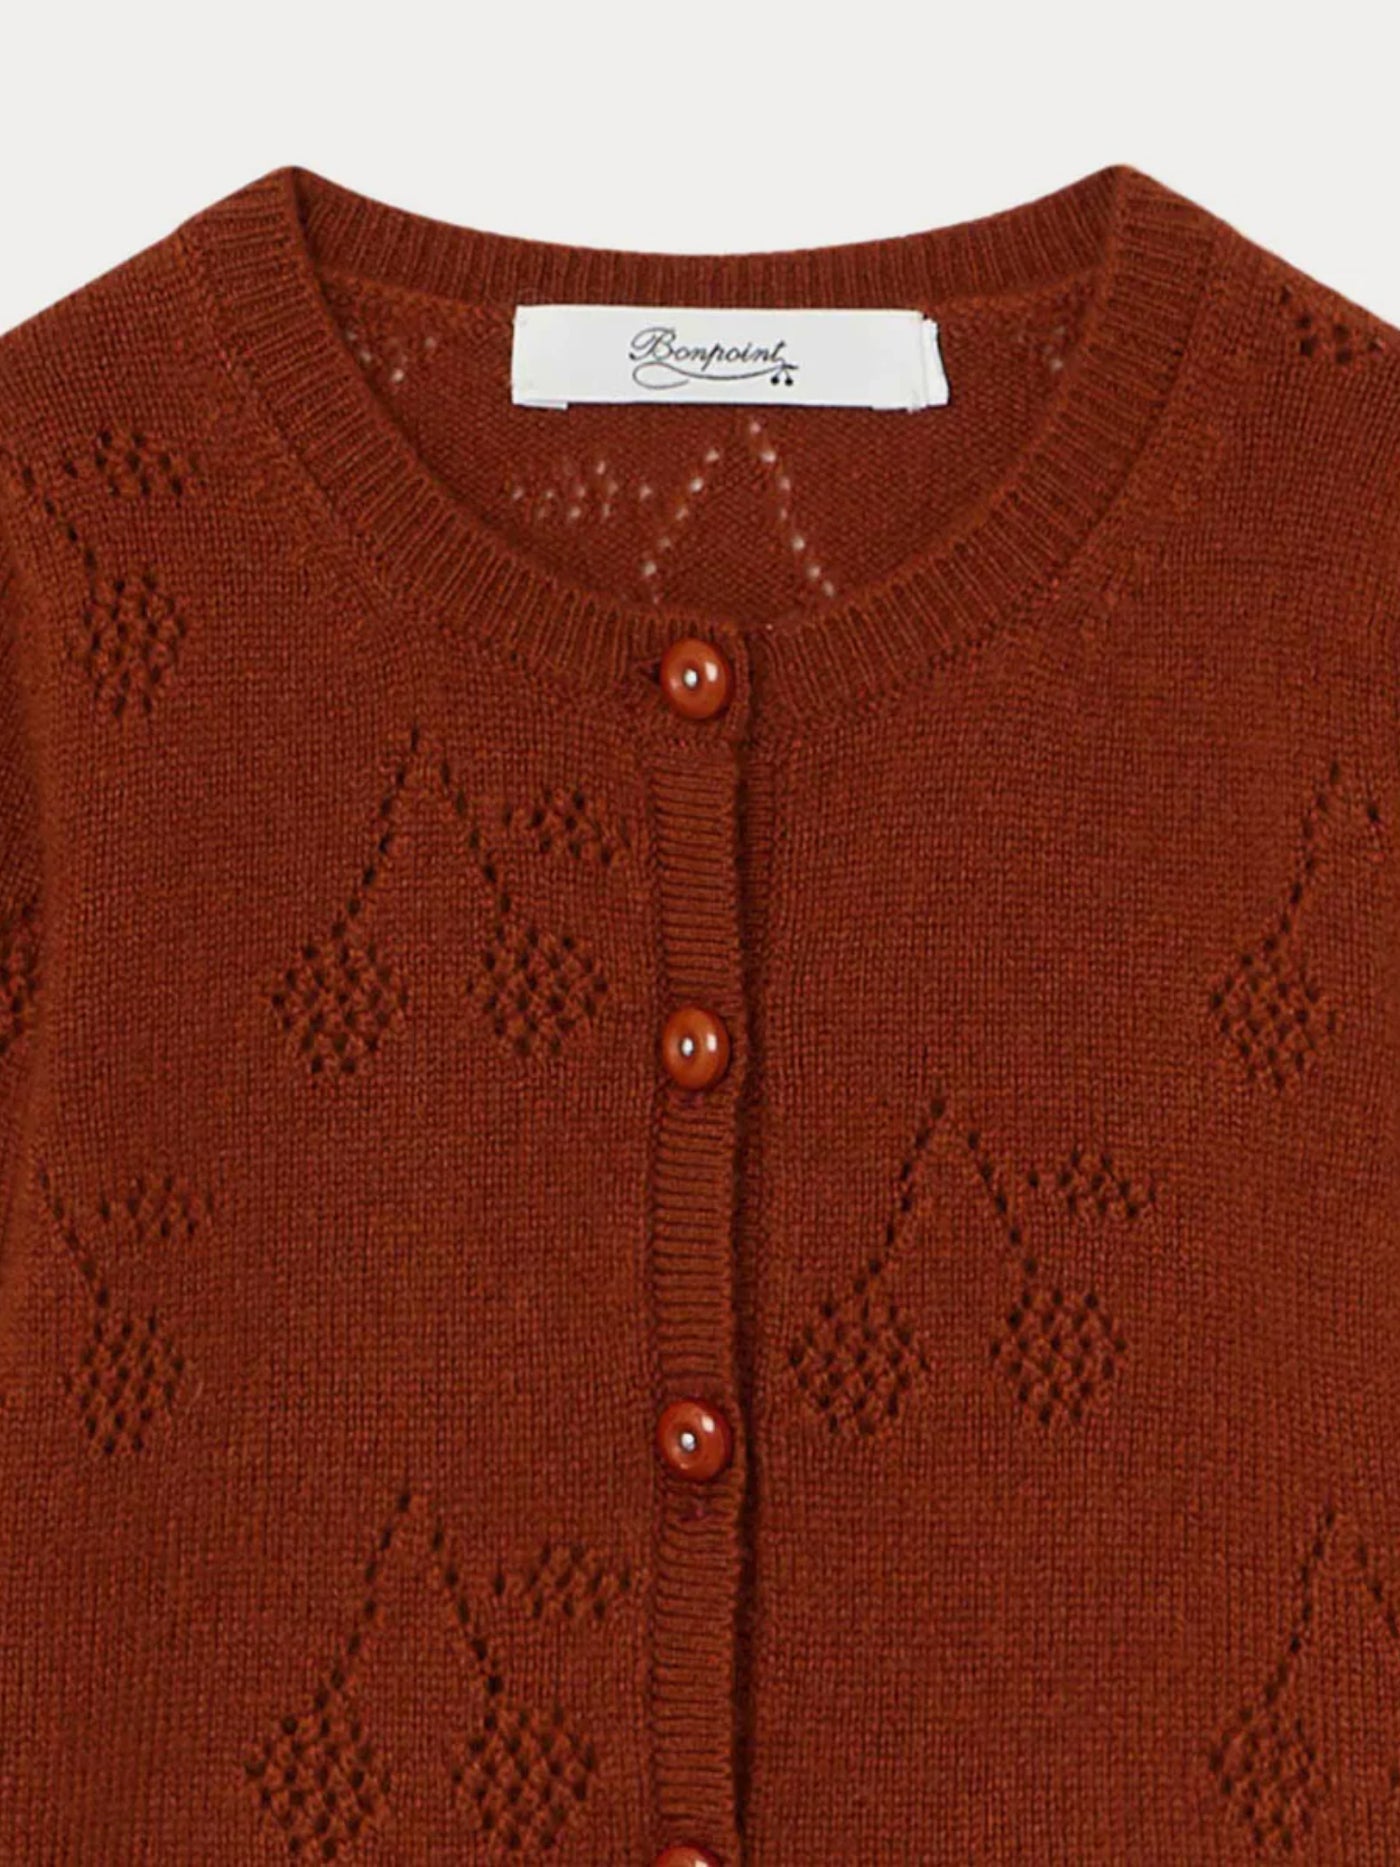 Cardigan with Openwork Knit Cherries for Baby squirrel